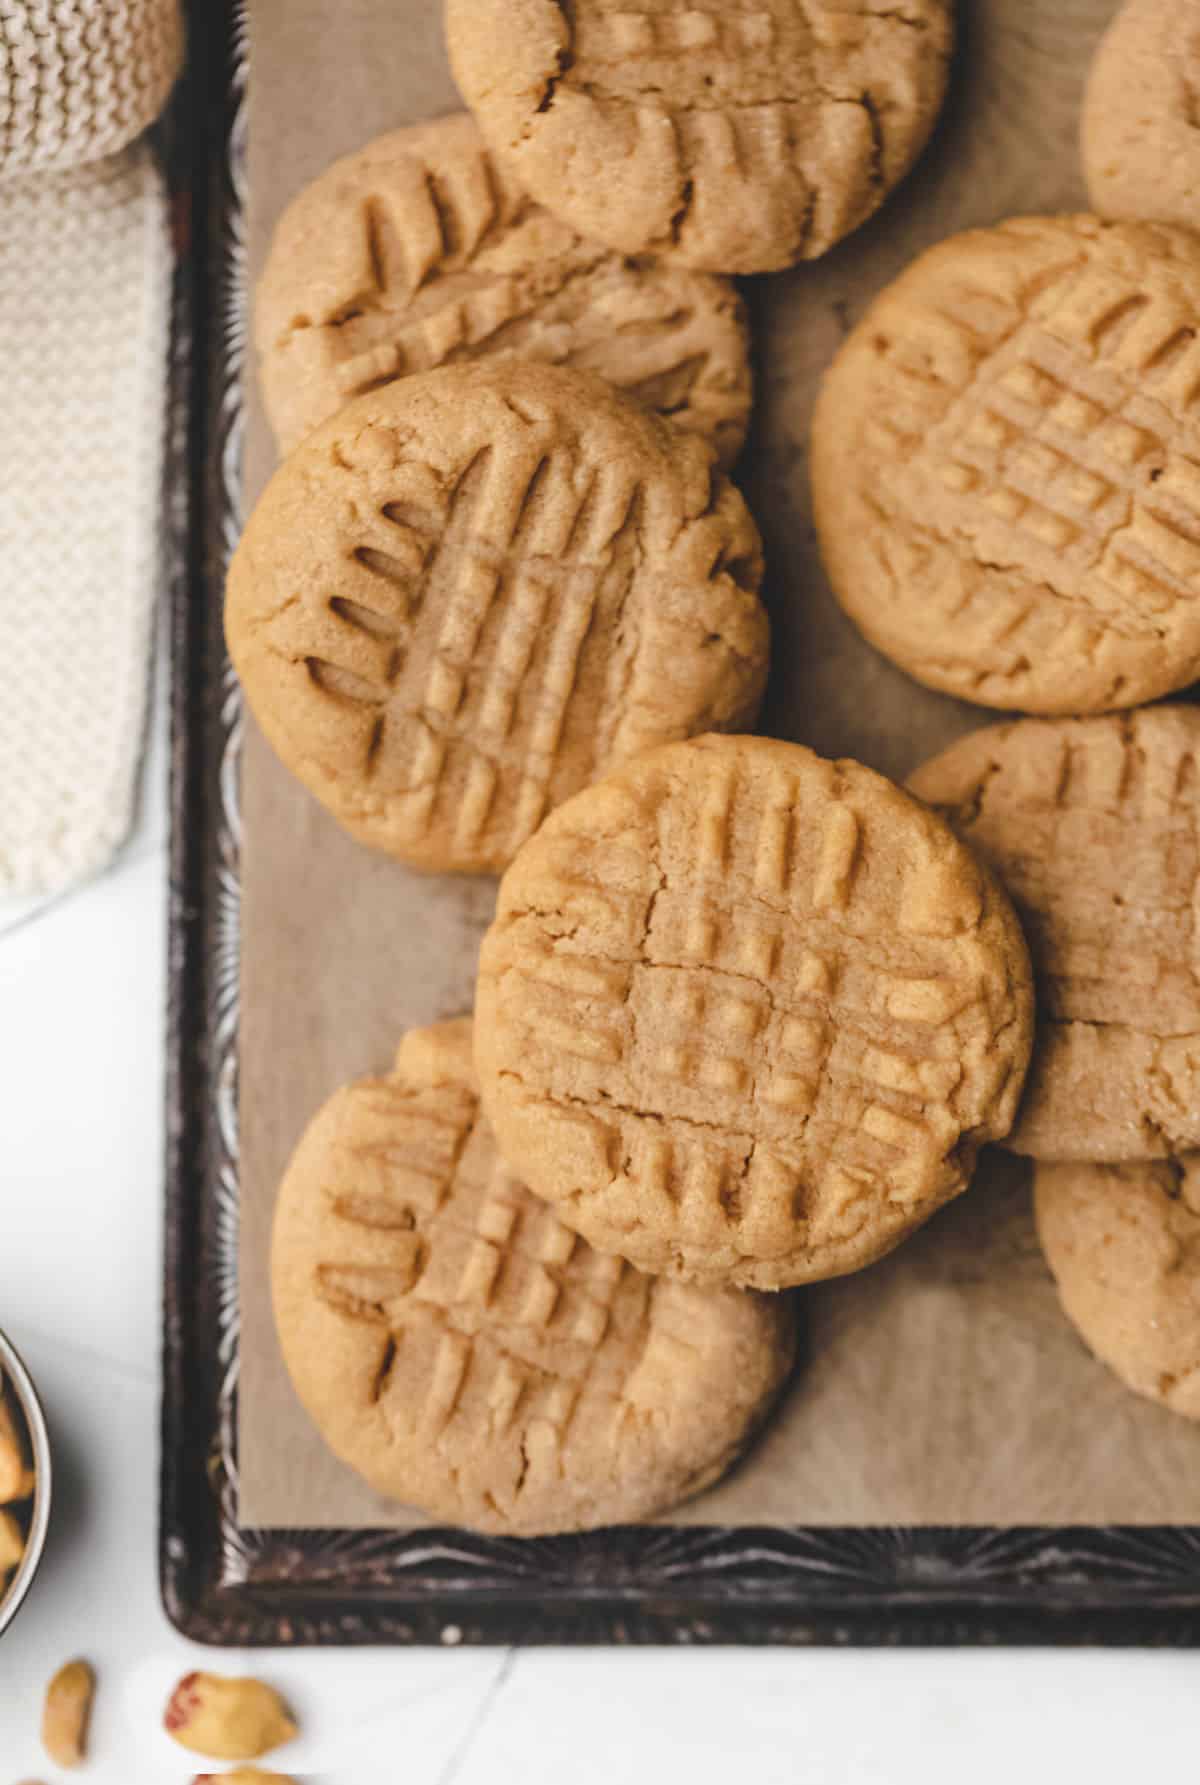 Overlapping peanut butter cookies on a piece of brown parchment paper.